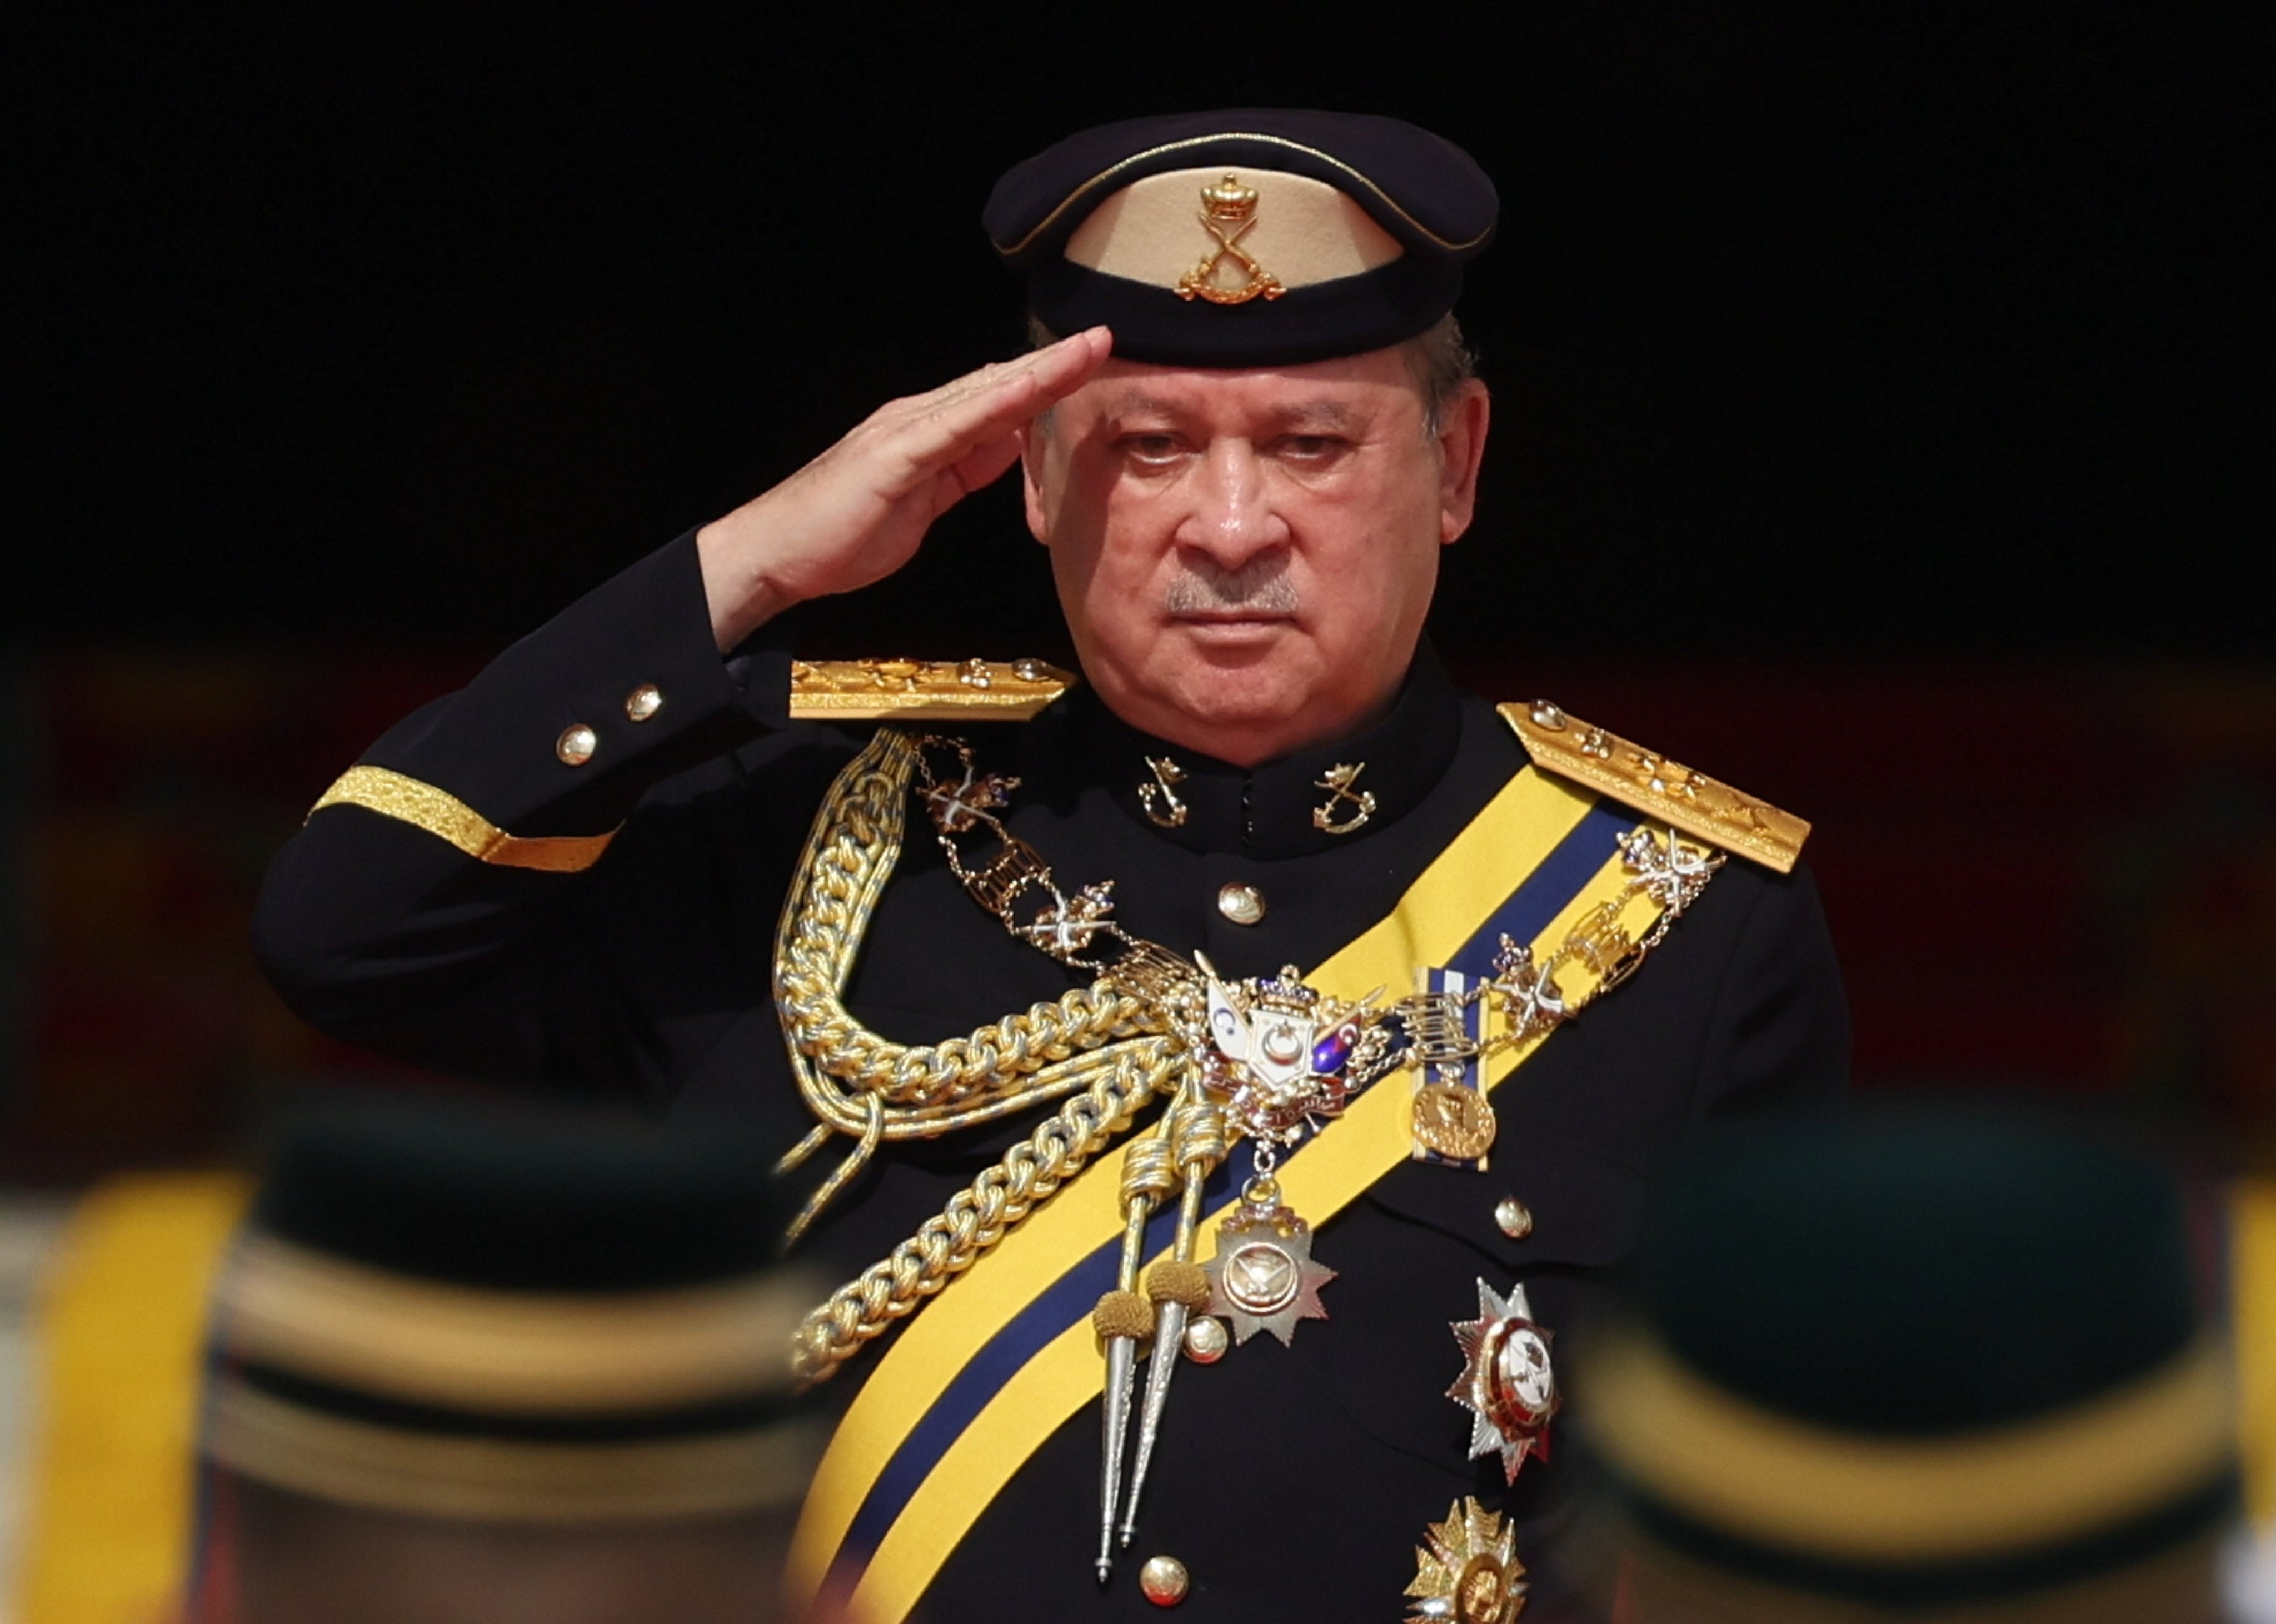 Sultan Ibrahim Sultan Iskandar salutes the guard of honour at the National Palace in Kuala Lumpur on Wednesday, during a ceremony in which he was installed as Malaysia’s 17th king. Photo: EPA-EFE